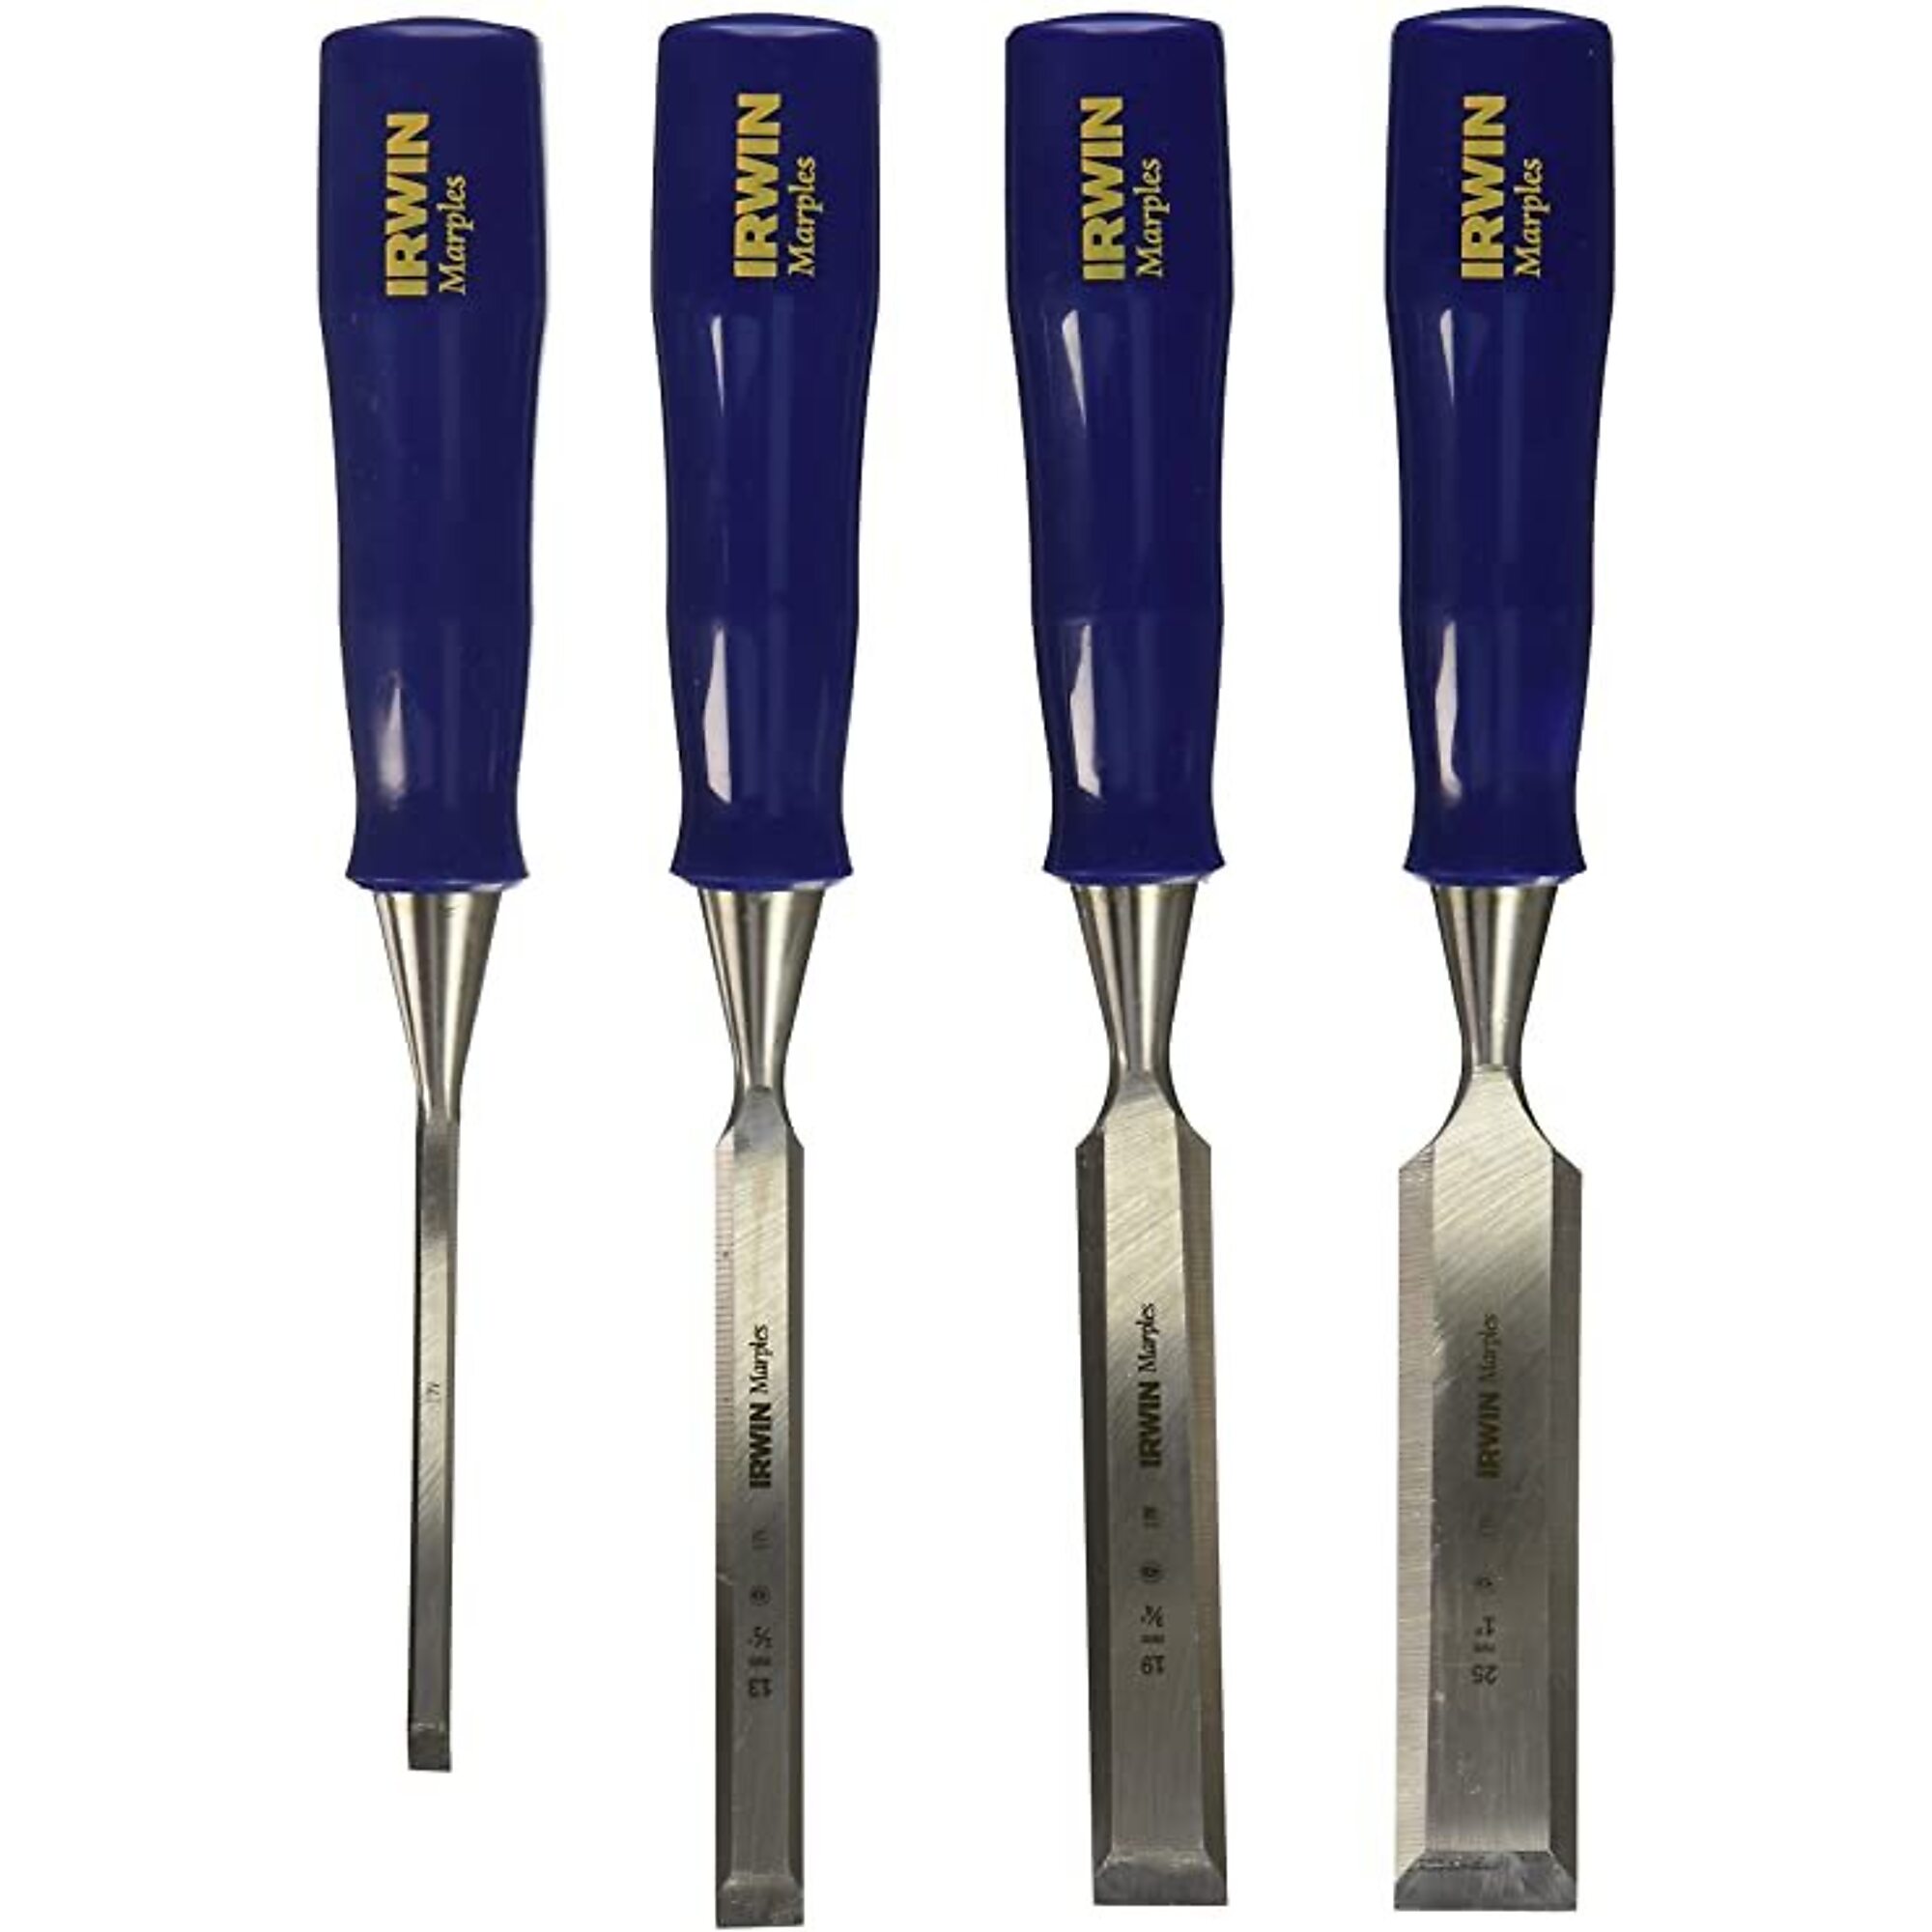 Irwin, Marples Woodworking 4-Piece Chisel Set, Product Type Chisel, Pieces (qty.) 4, Model M444S4N